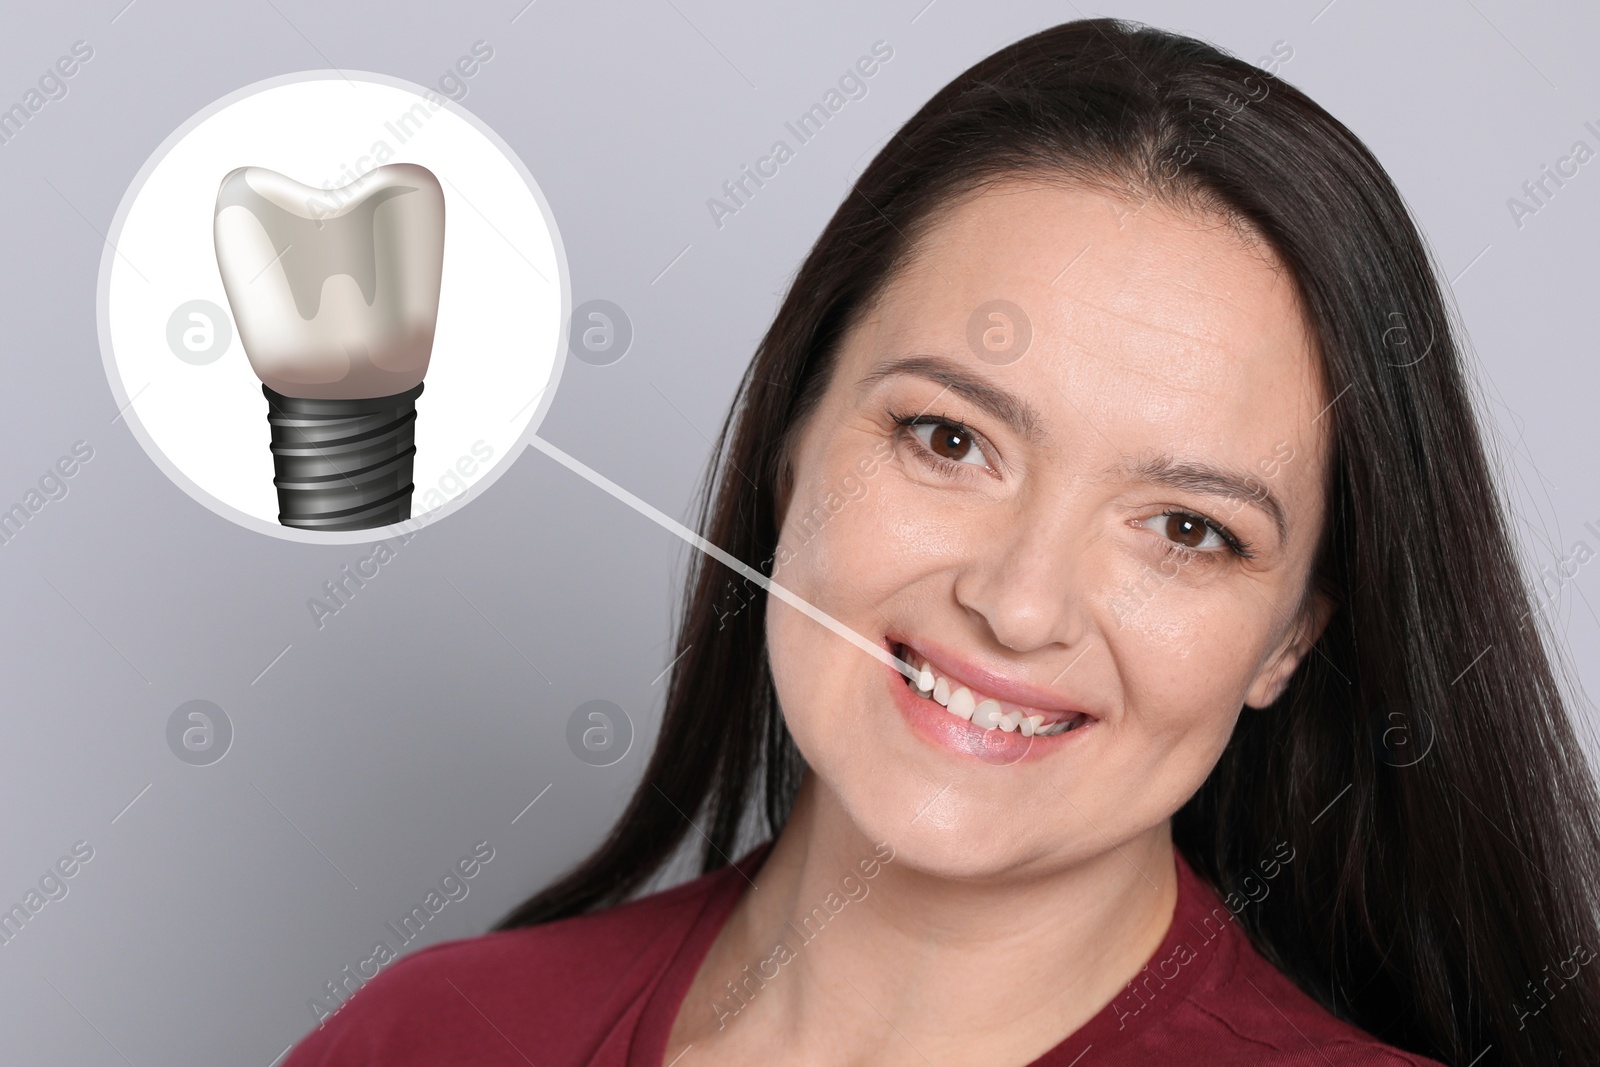 Image of Happy woman with perfect teeth smiling on light grey background. Illustration of dental implant